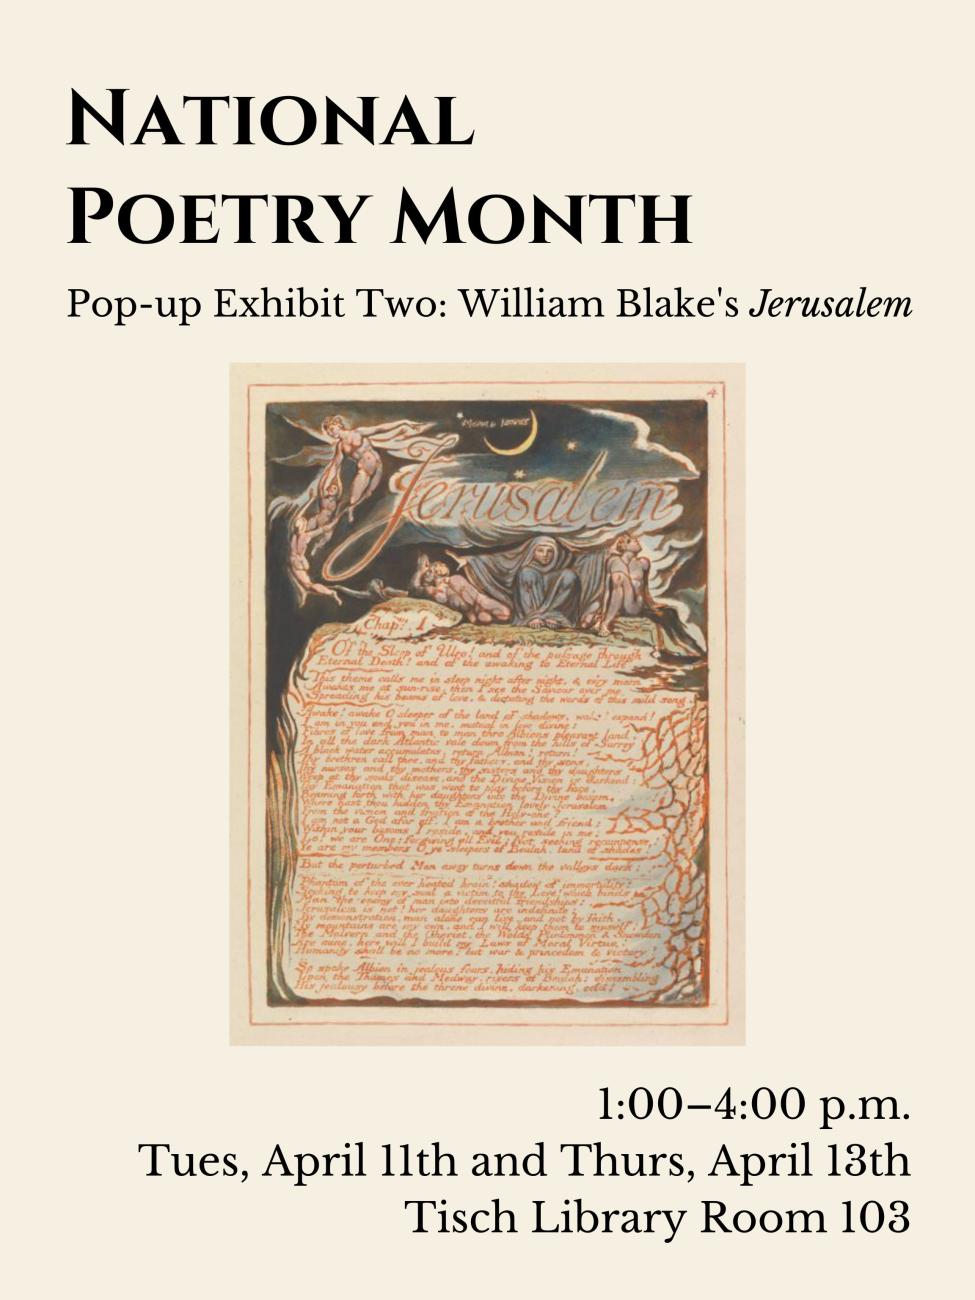 National Poetry Month: Pop-up Exhibit Two on Tuesday, April 11th and Thursday, April 13th at 1:00-4:00 PM in Tisch Library Room 103. This exhibit will highlight an illustrated facsimile of William Blake's Jerusalem.